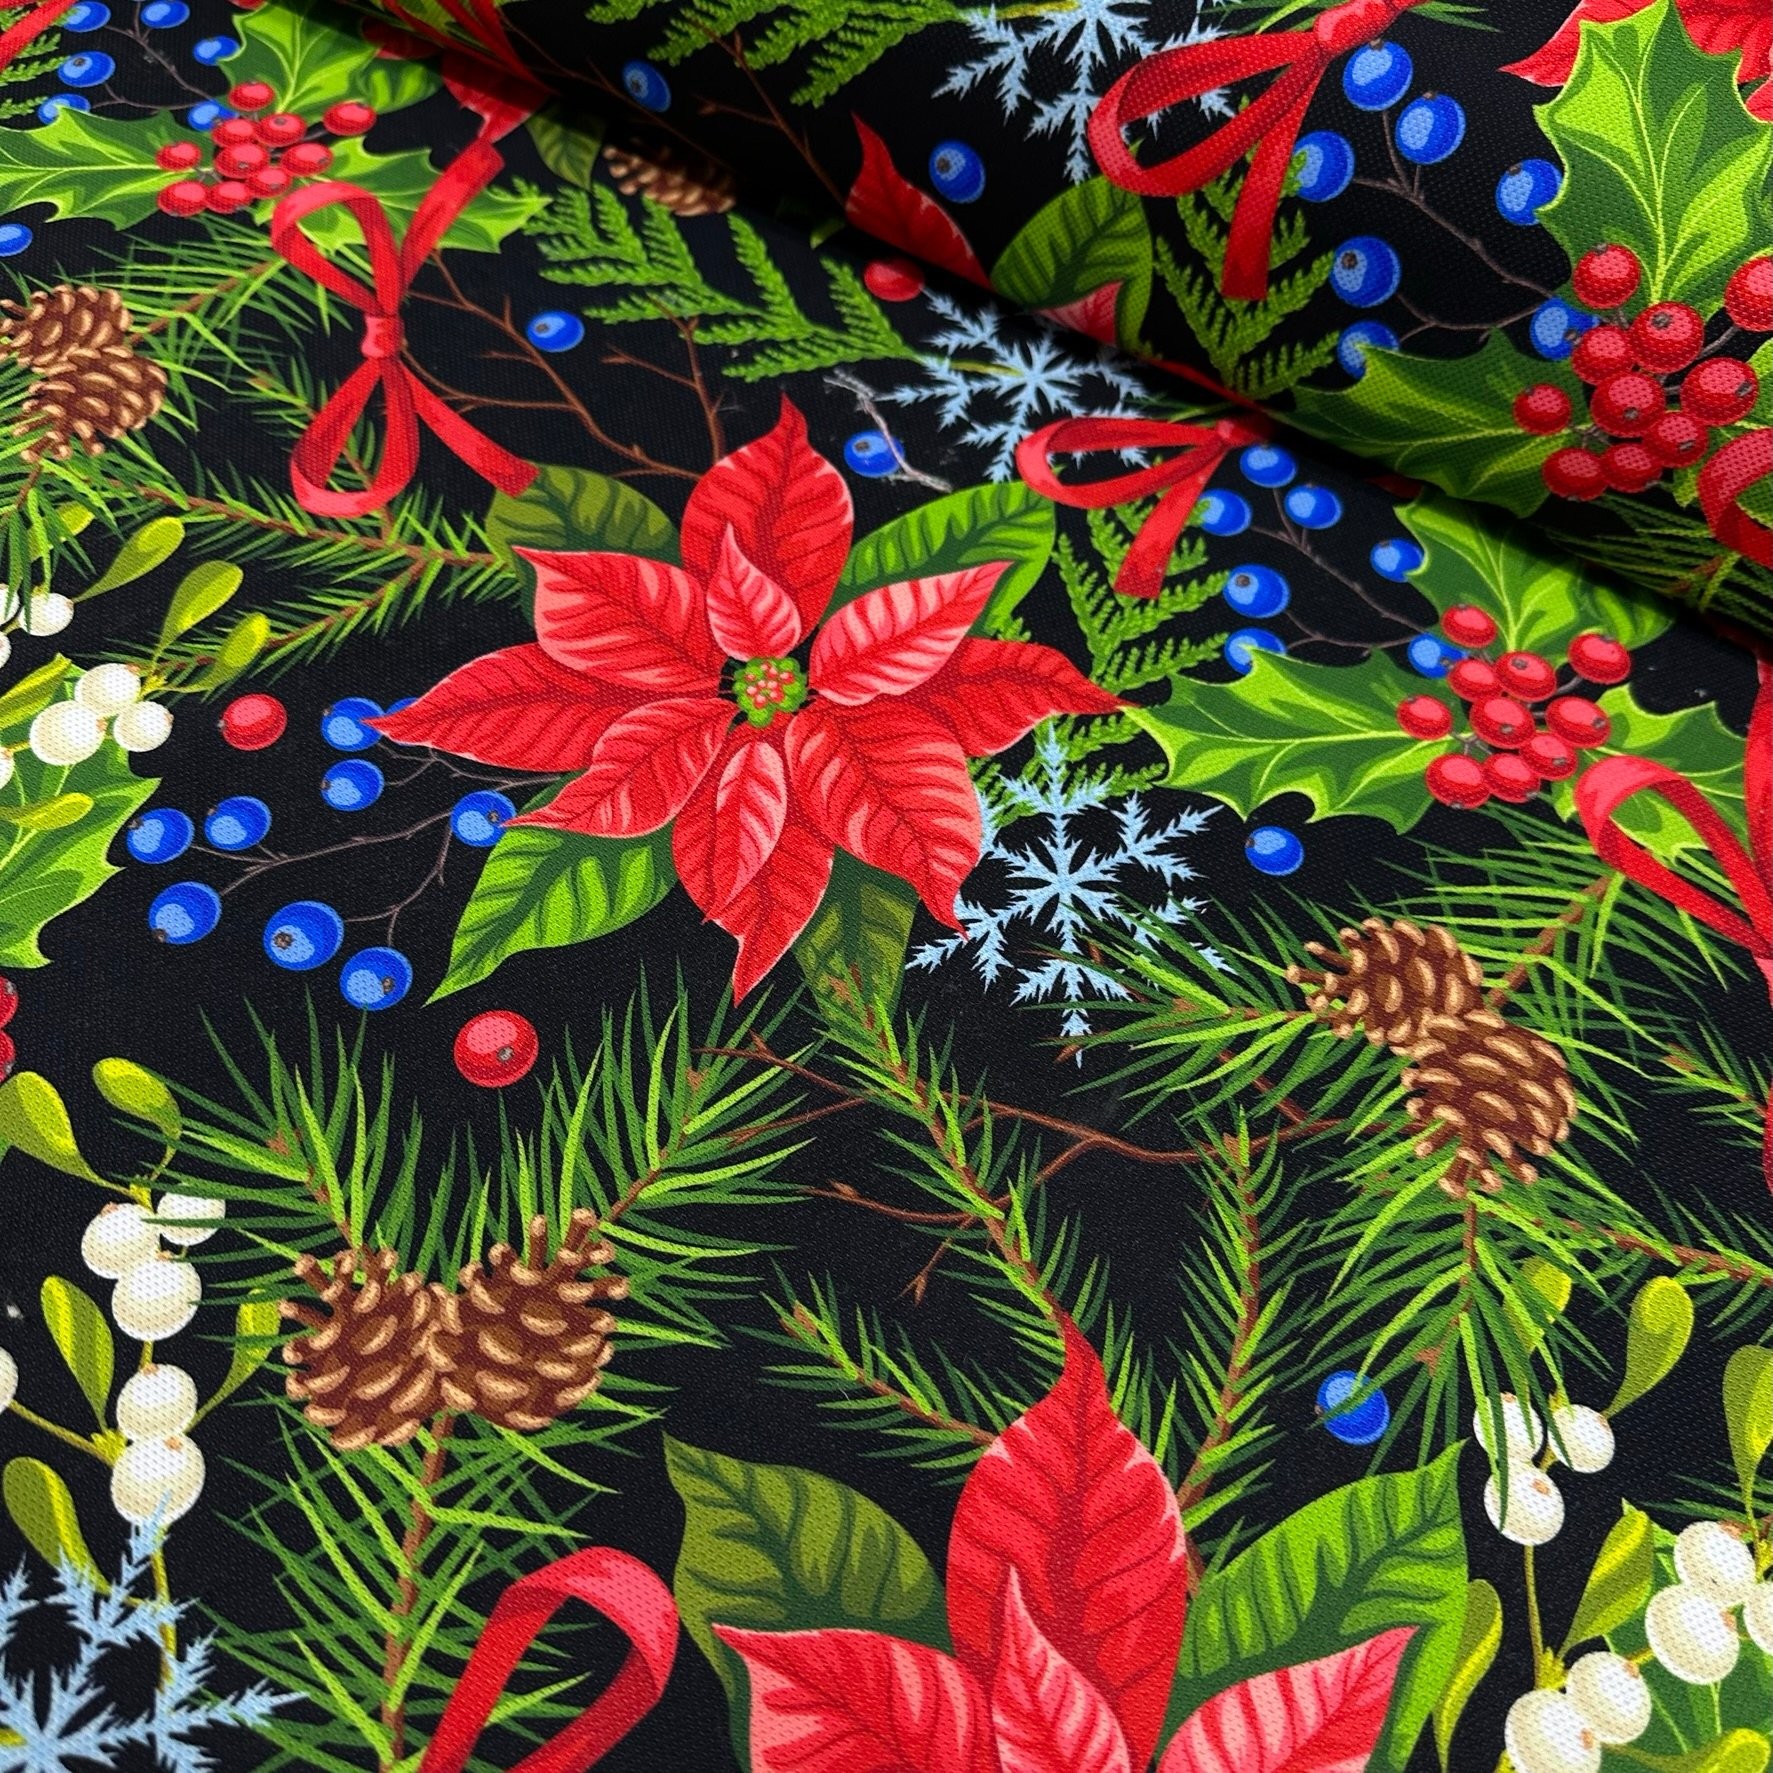 Flowers of the Black Forest Digital Printing Fabric